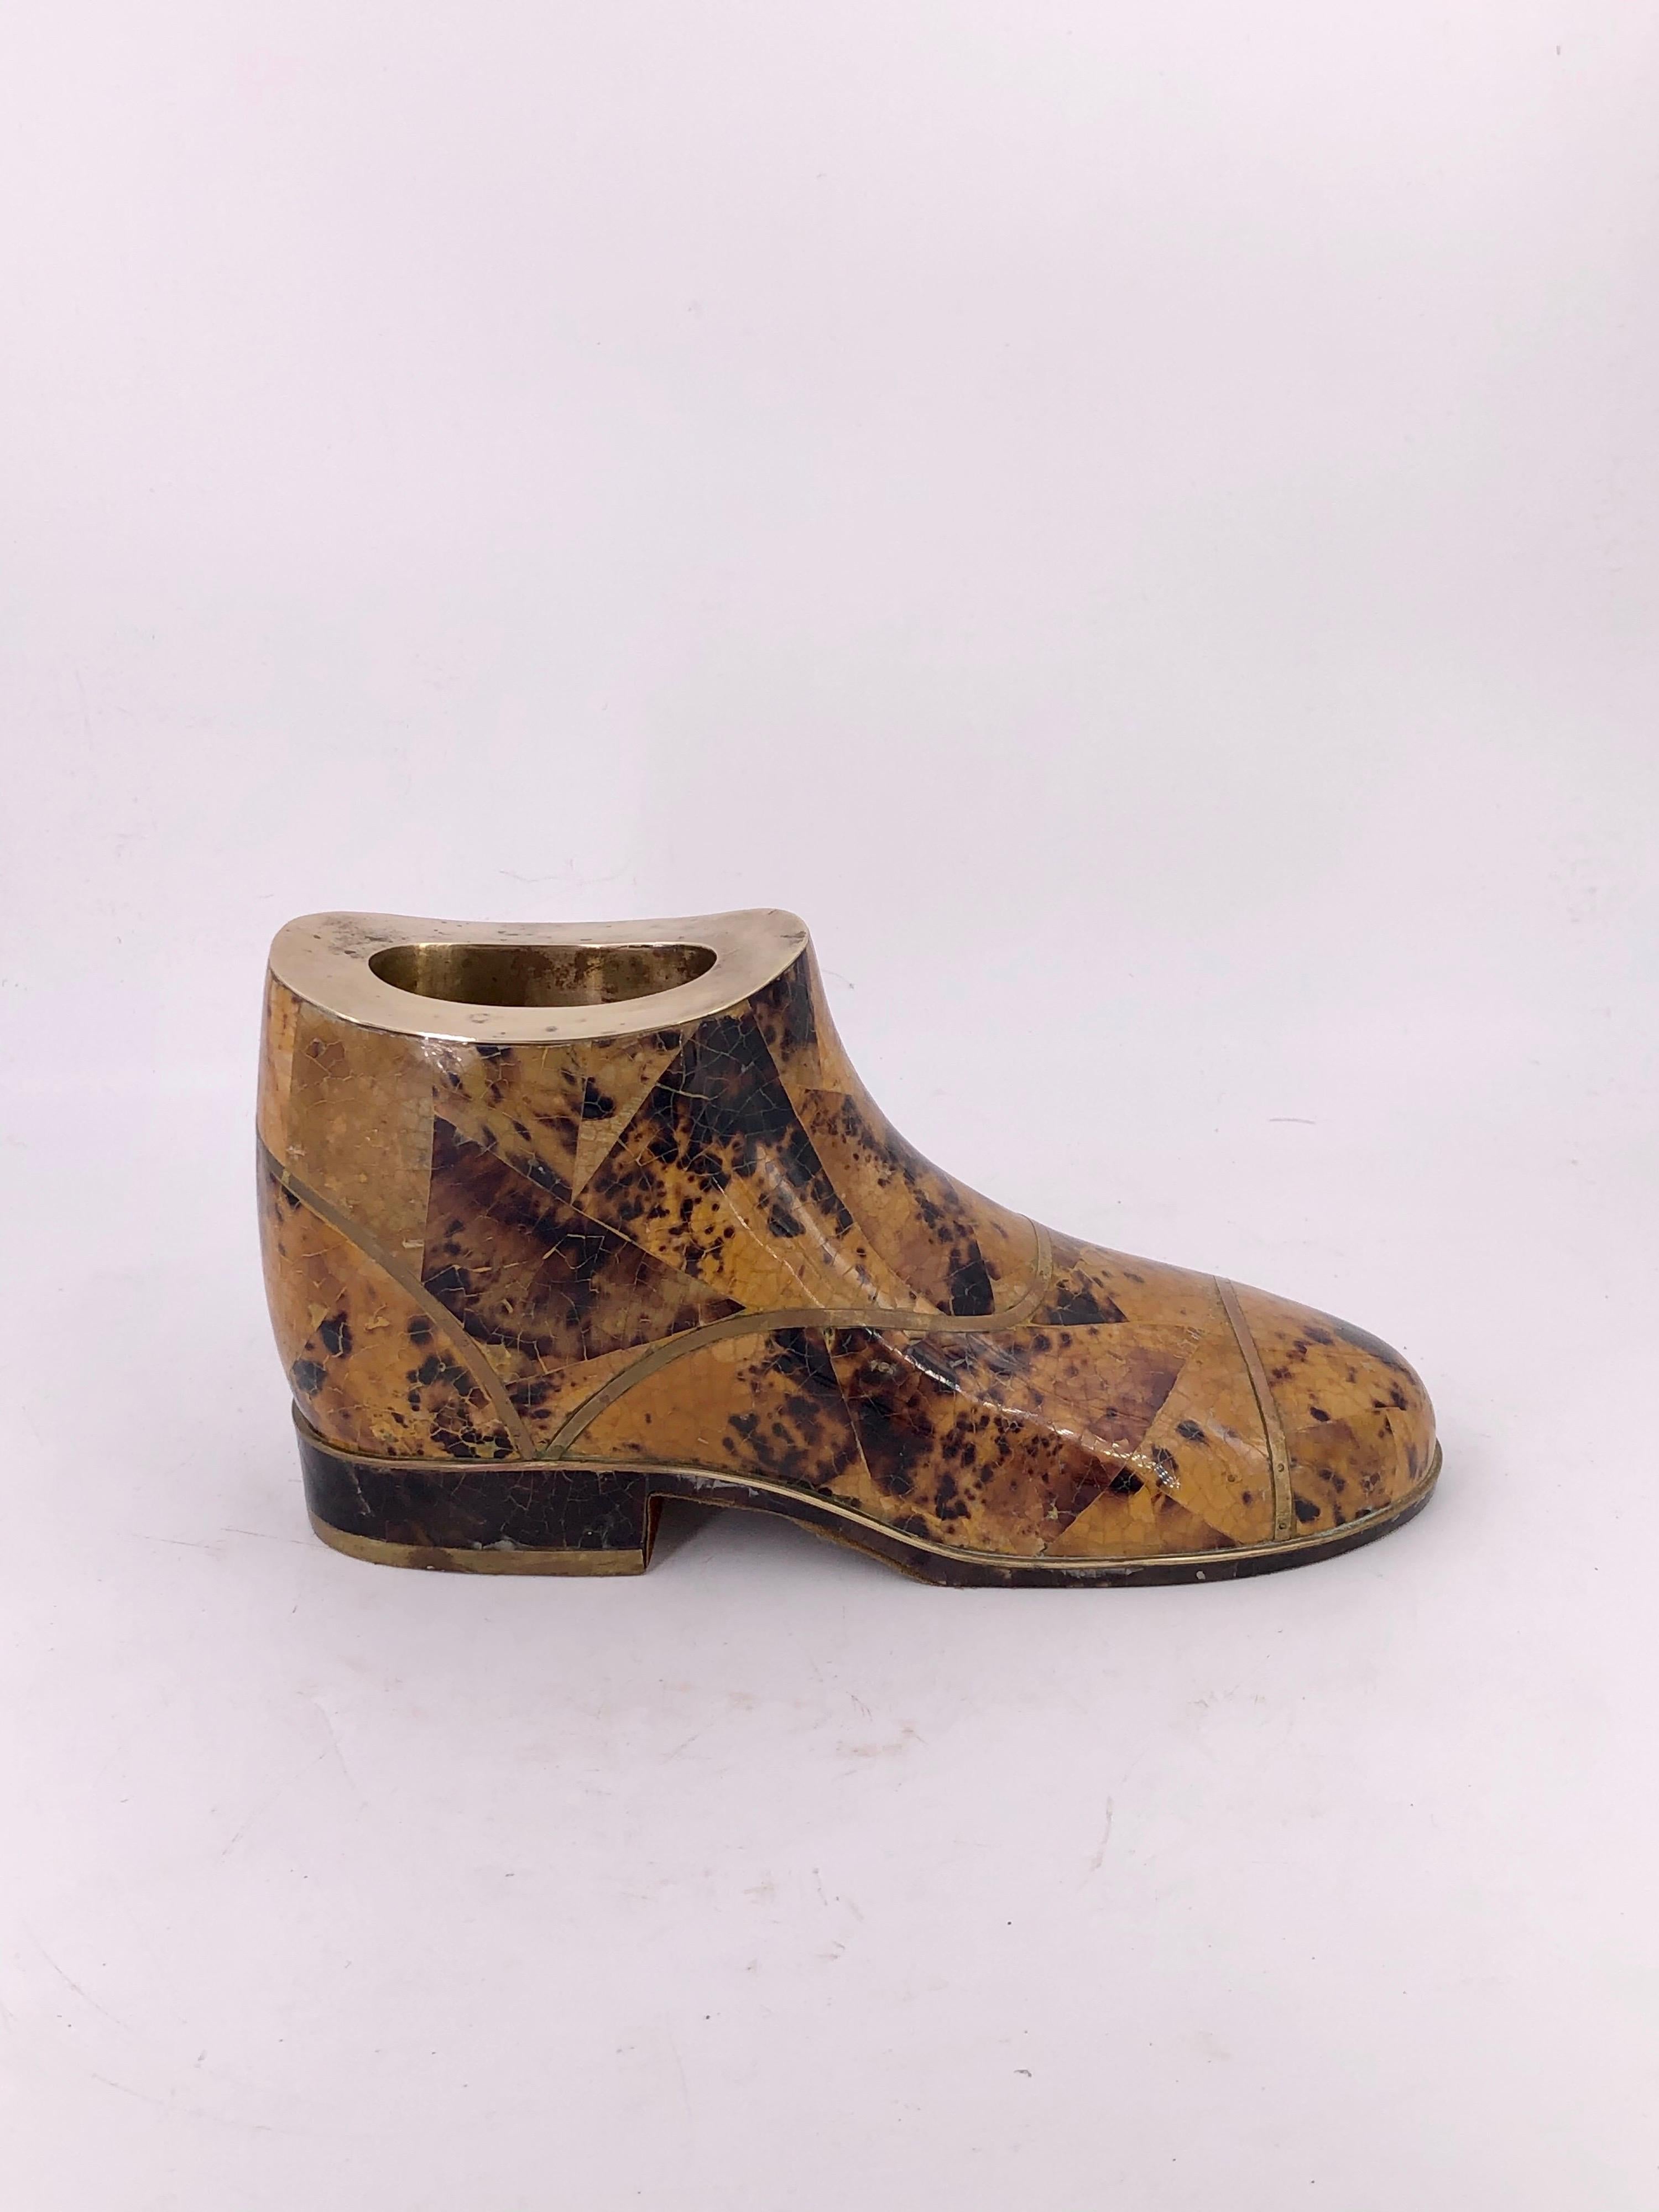 Beautiful and rare decorative boot in tessellated stone by Maitland Smith, circa 1970s nice patinated brass inlaid can be used to put pocket change or ashtray, etc.